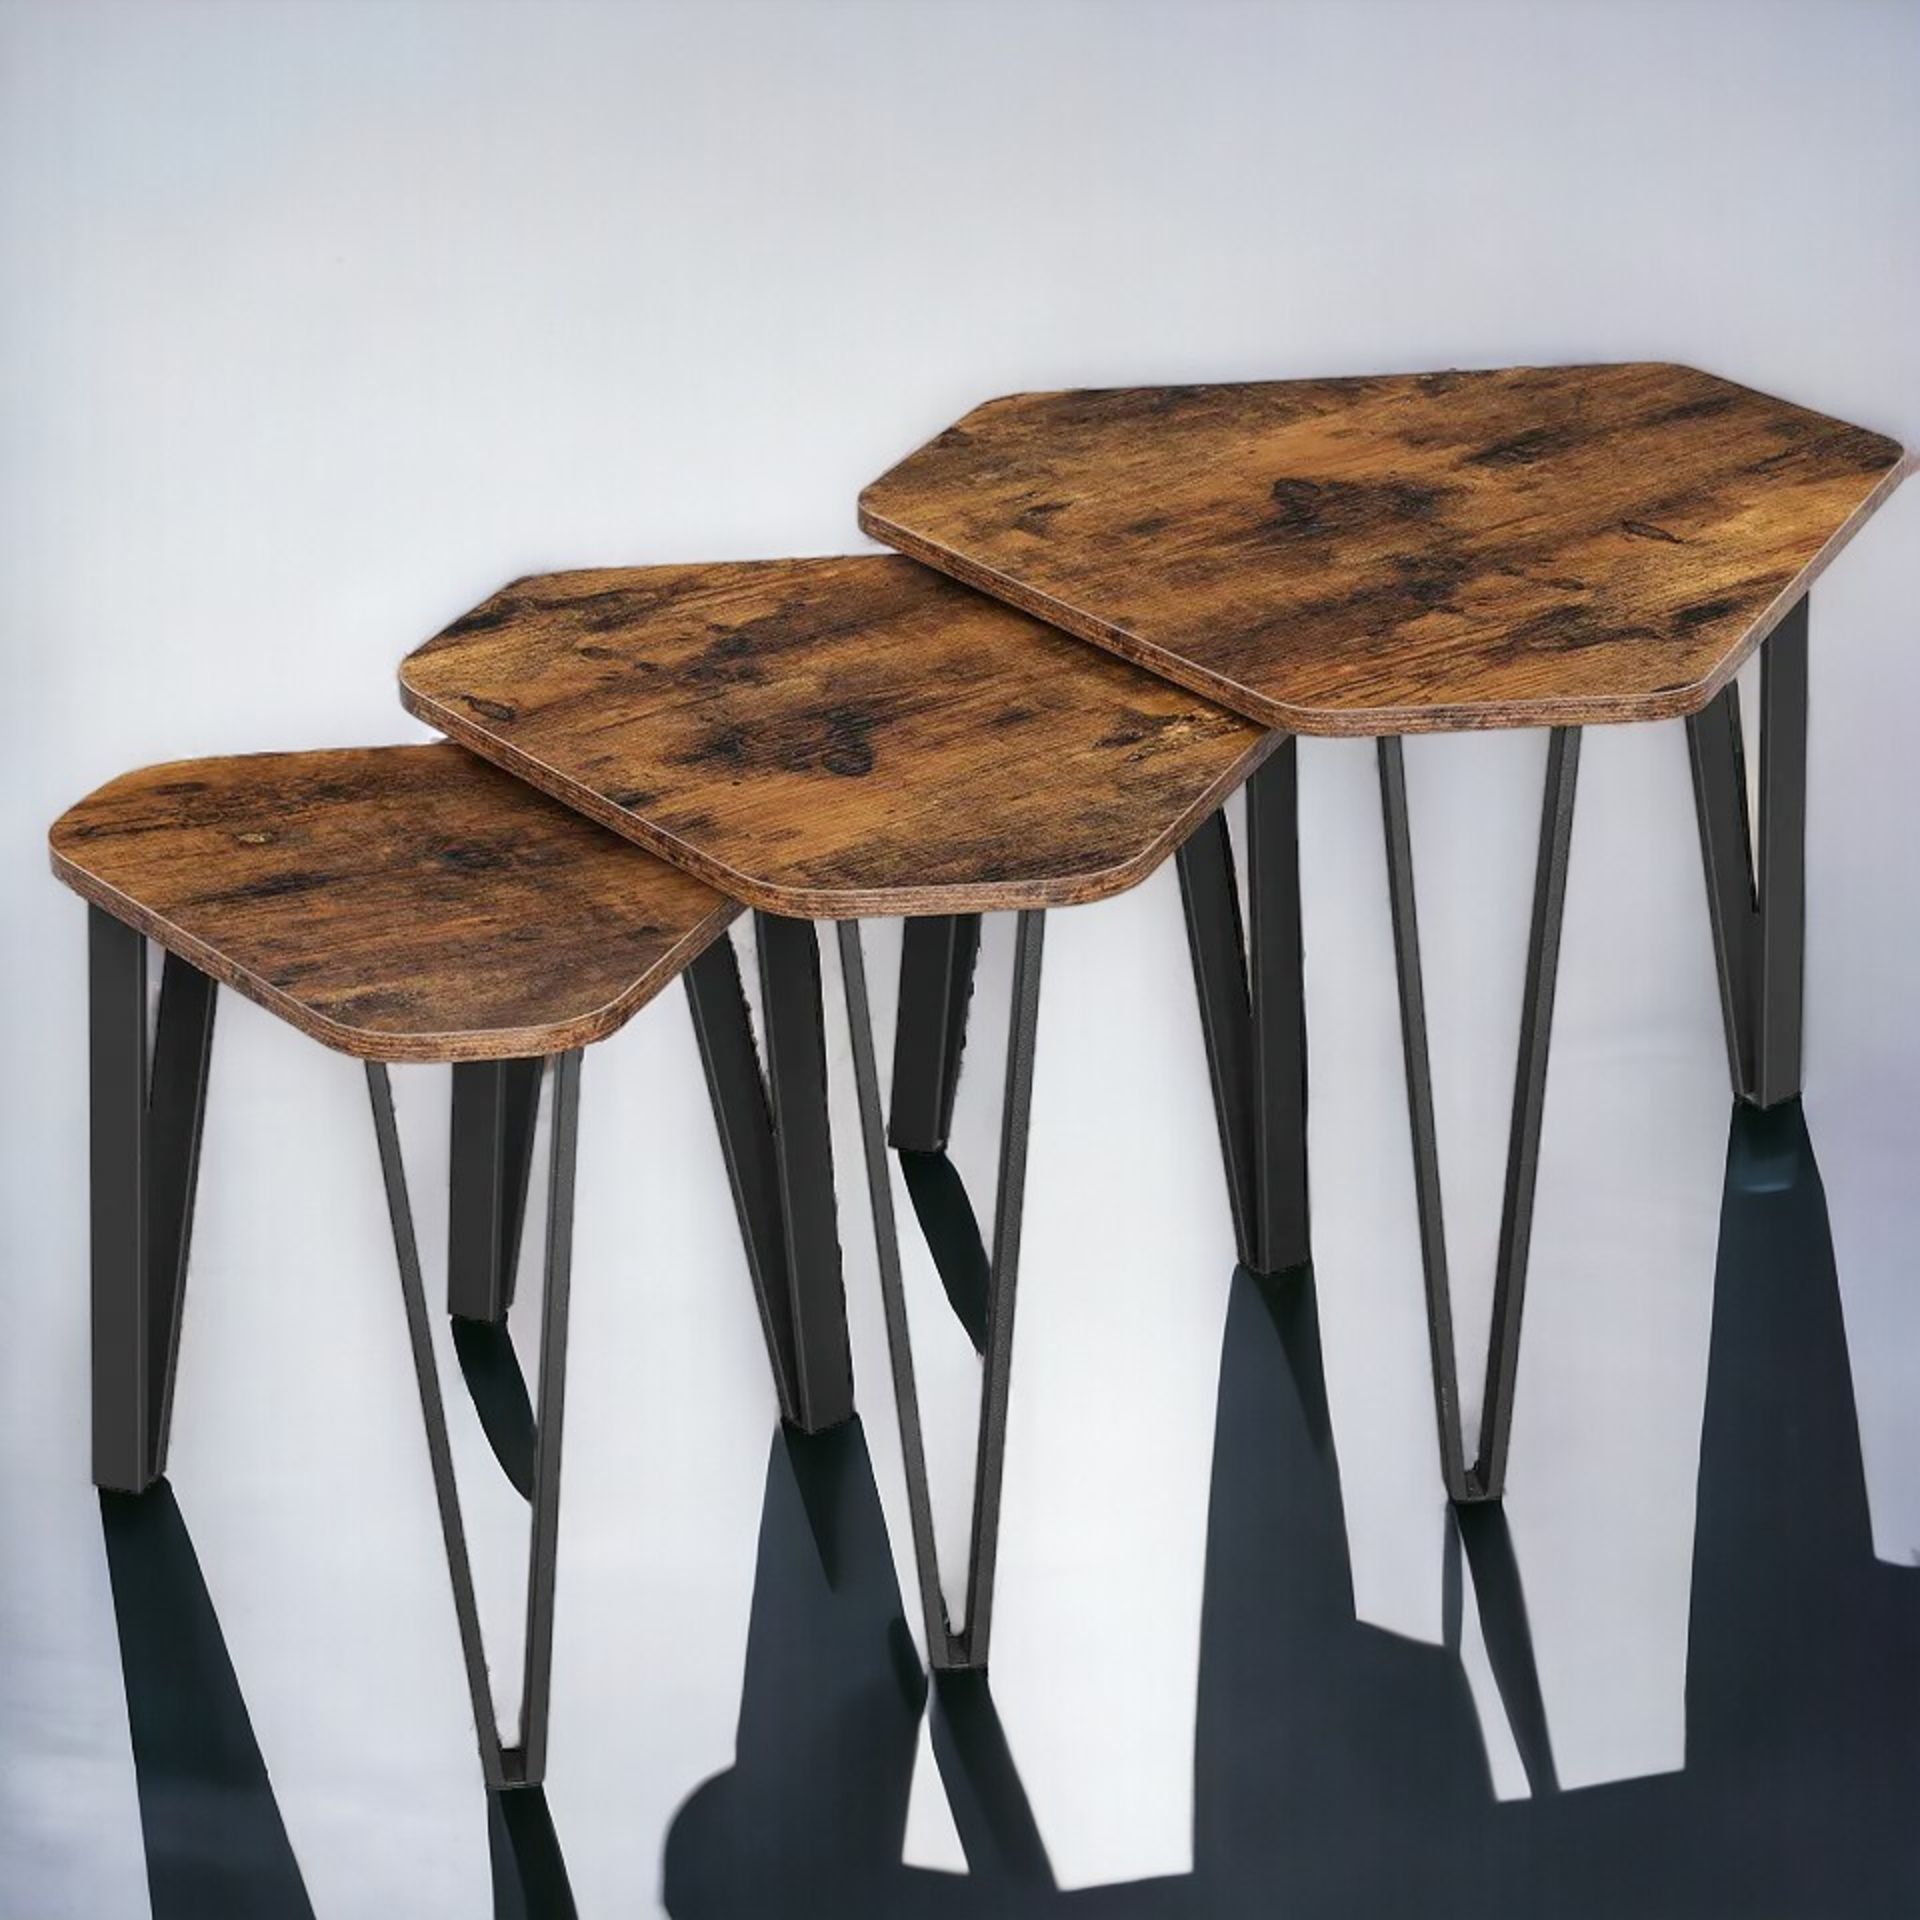 FREE DELIVERY - BRAND NEW NESTING COFFEE TABLE SET OF 3 END TABLES STACKING SIDE TABLES